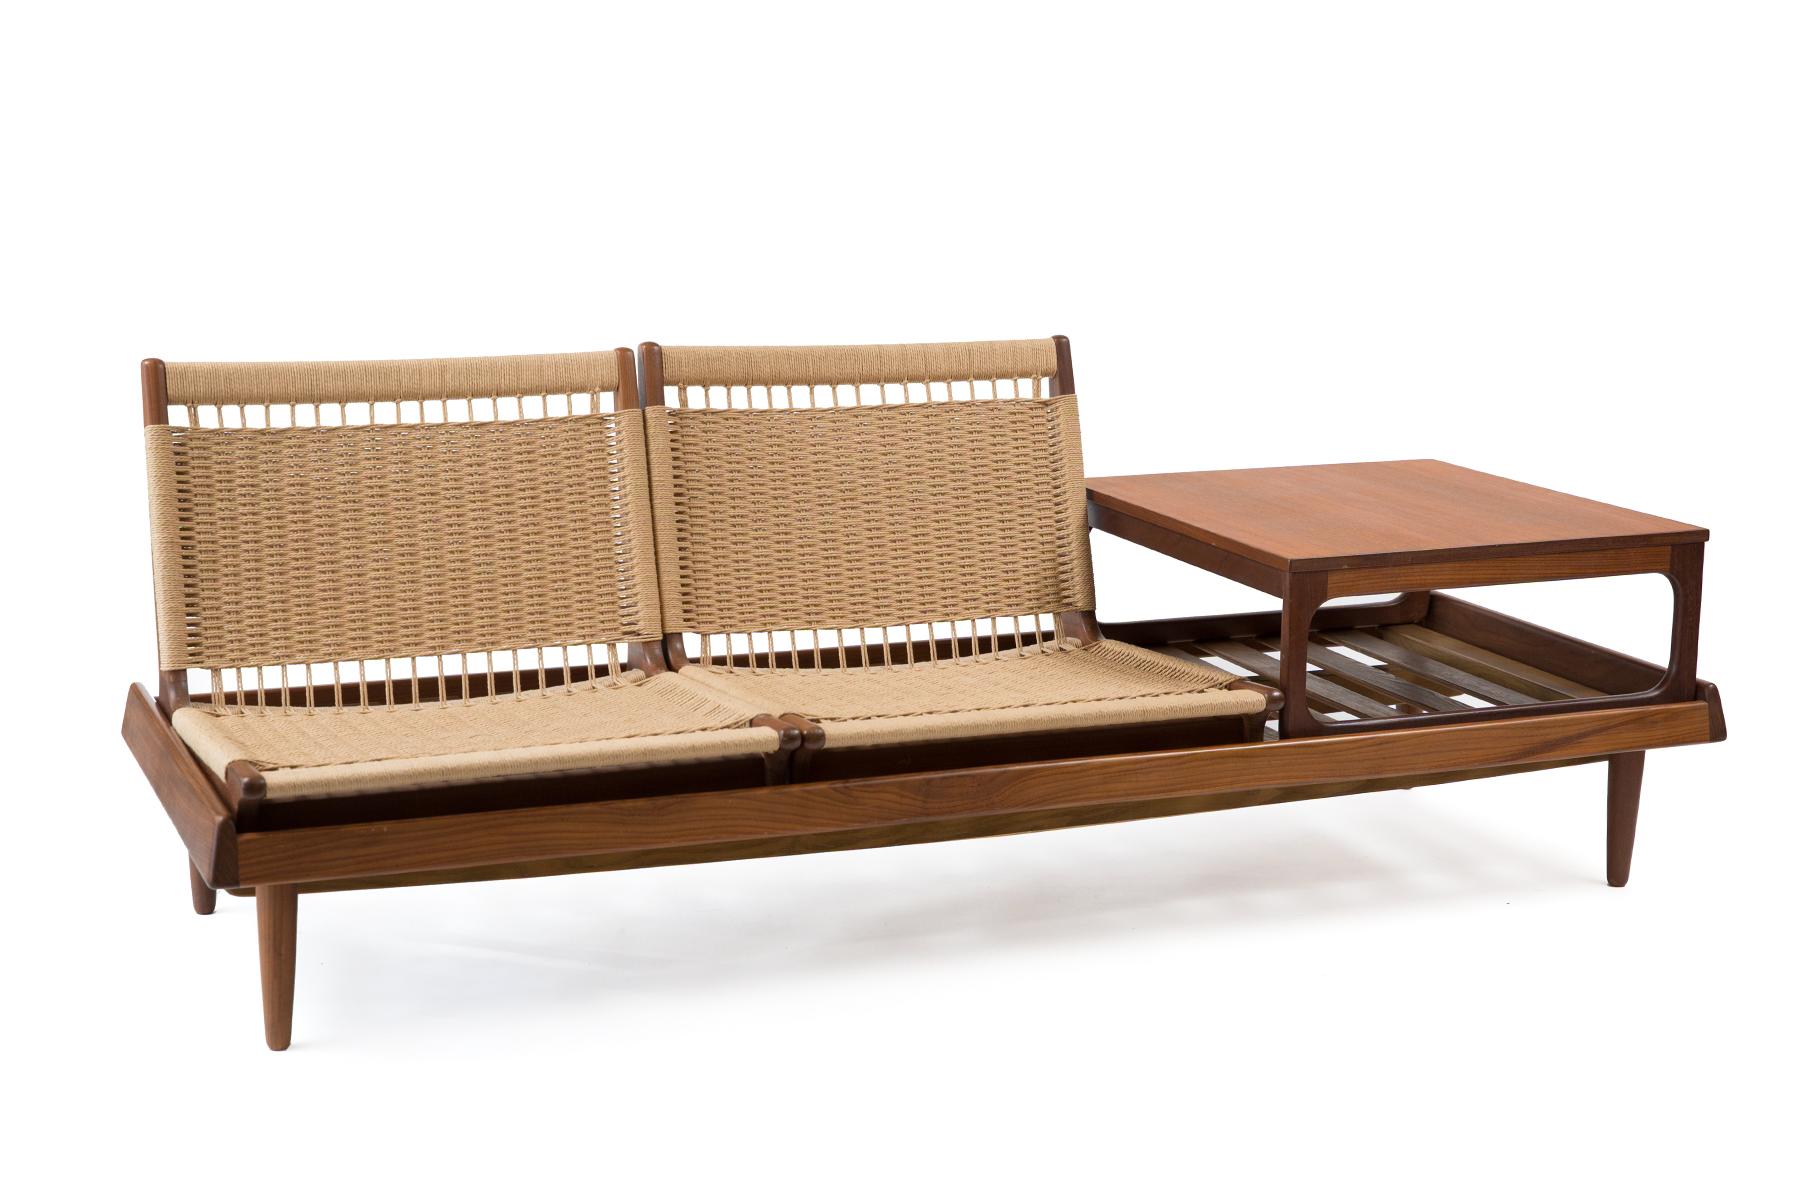 This rare Hans Olsen for Bramin modular seating is from the early 1960s. The set's versatility is showcased with two low woven chairs and a table that sit atop a stunning bench. The chairs and table are removable so that they can be placed in